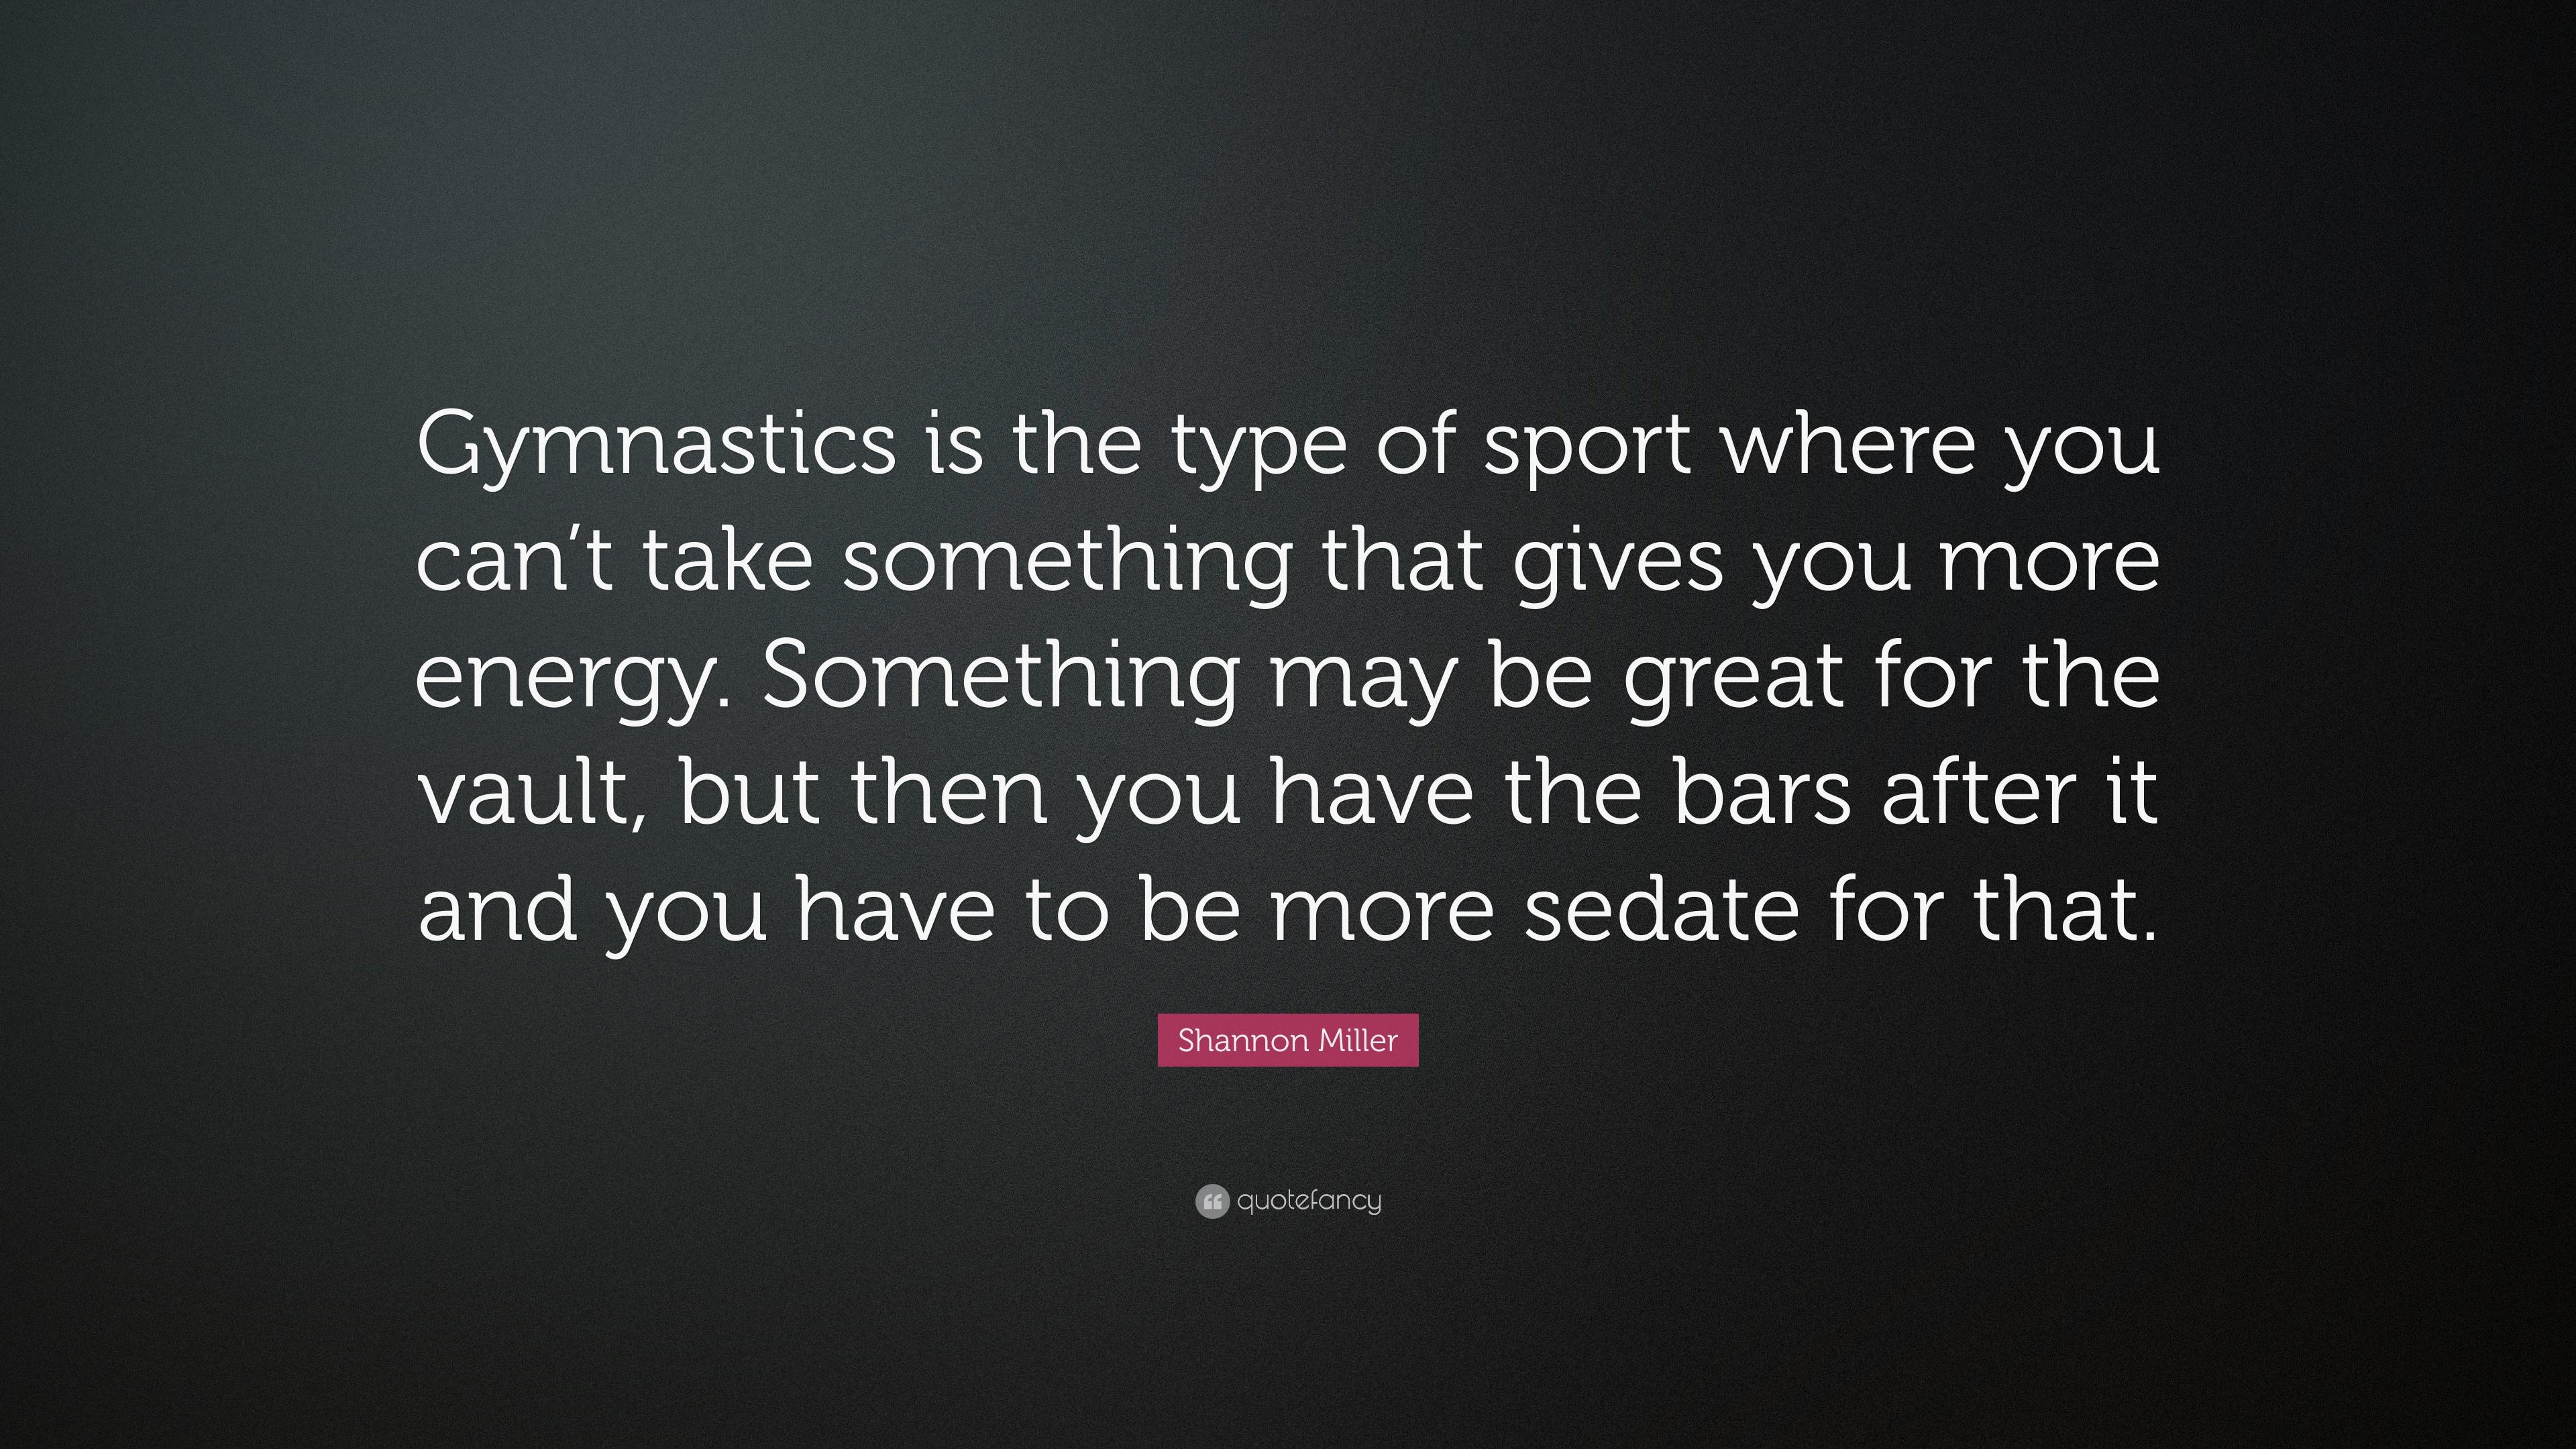 Shannon Miller Quote: “Gymnastics is the type of sport where you can